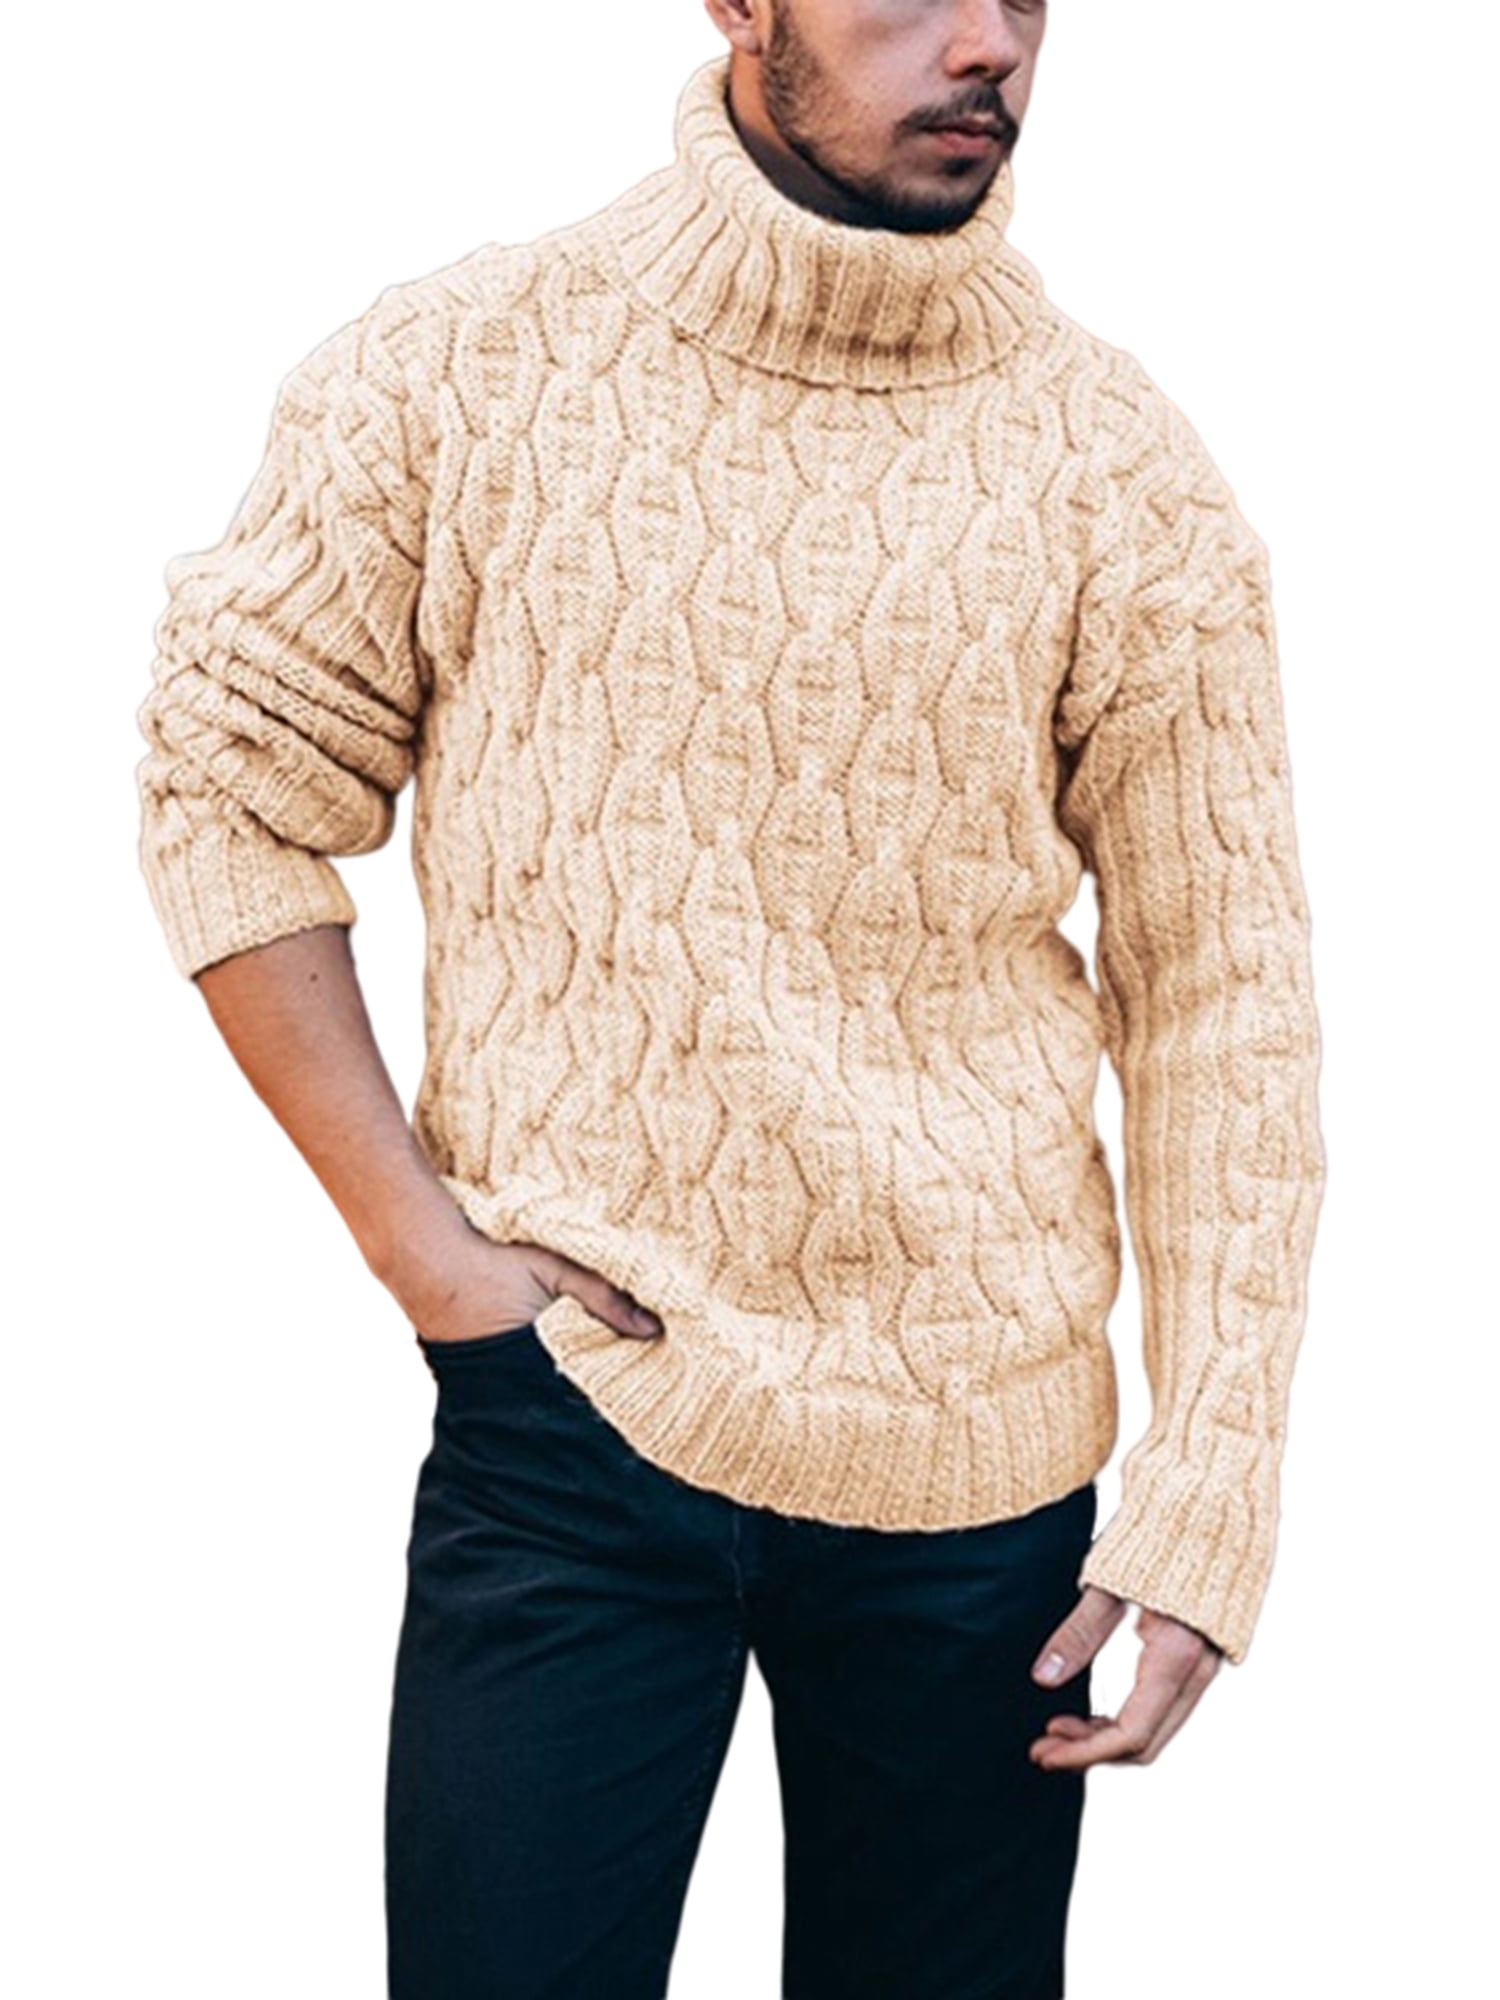 Mens Clothing Sweaters and knitwear Turtlenecks for Men Natural Sulvam Synthetic Over Argyle Turtleneck in Beige 